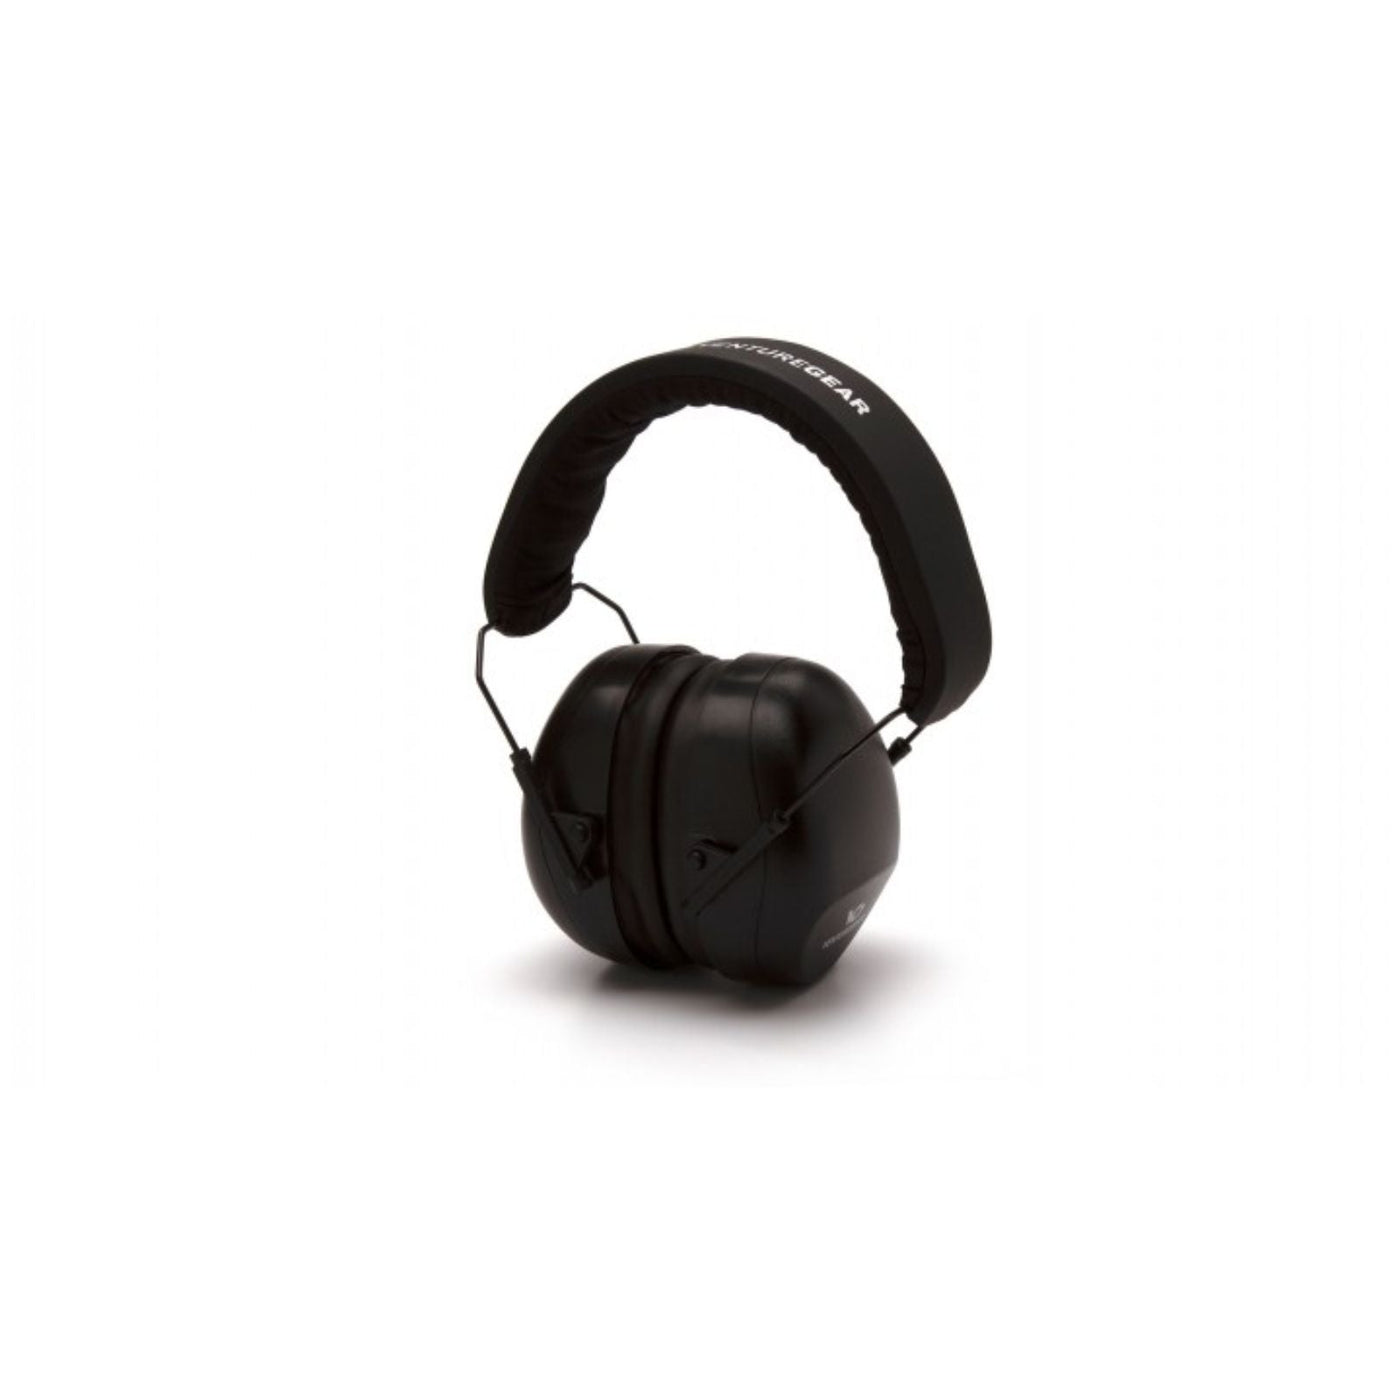 PYRAMEX SAFETY PRODUCTS Venture Gear Black 8010 Earmuff Shooting